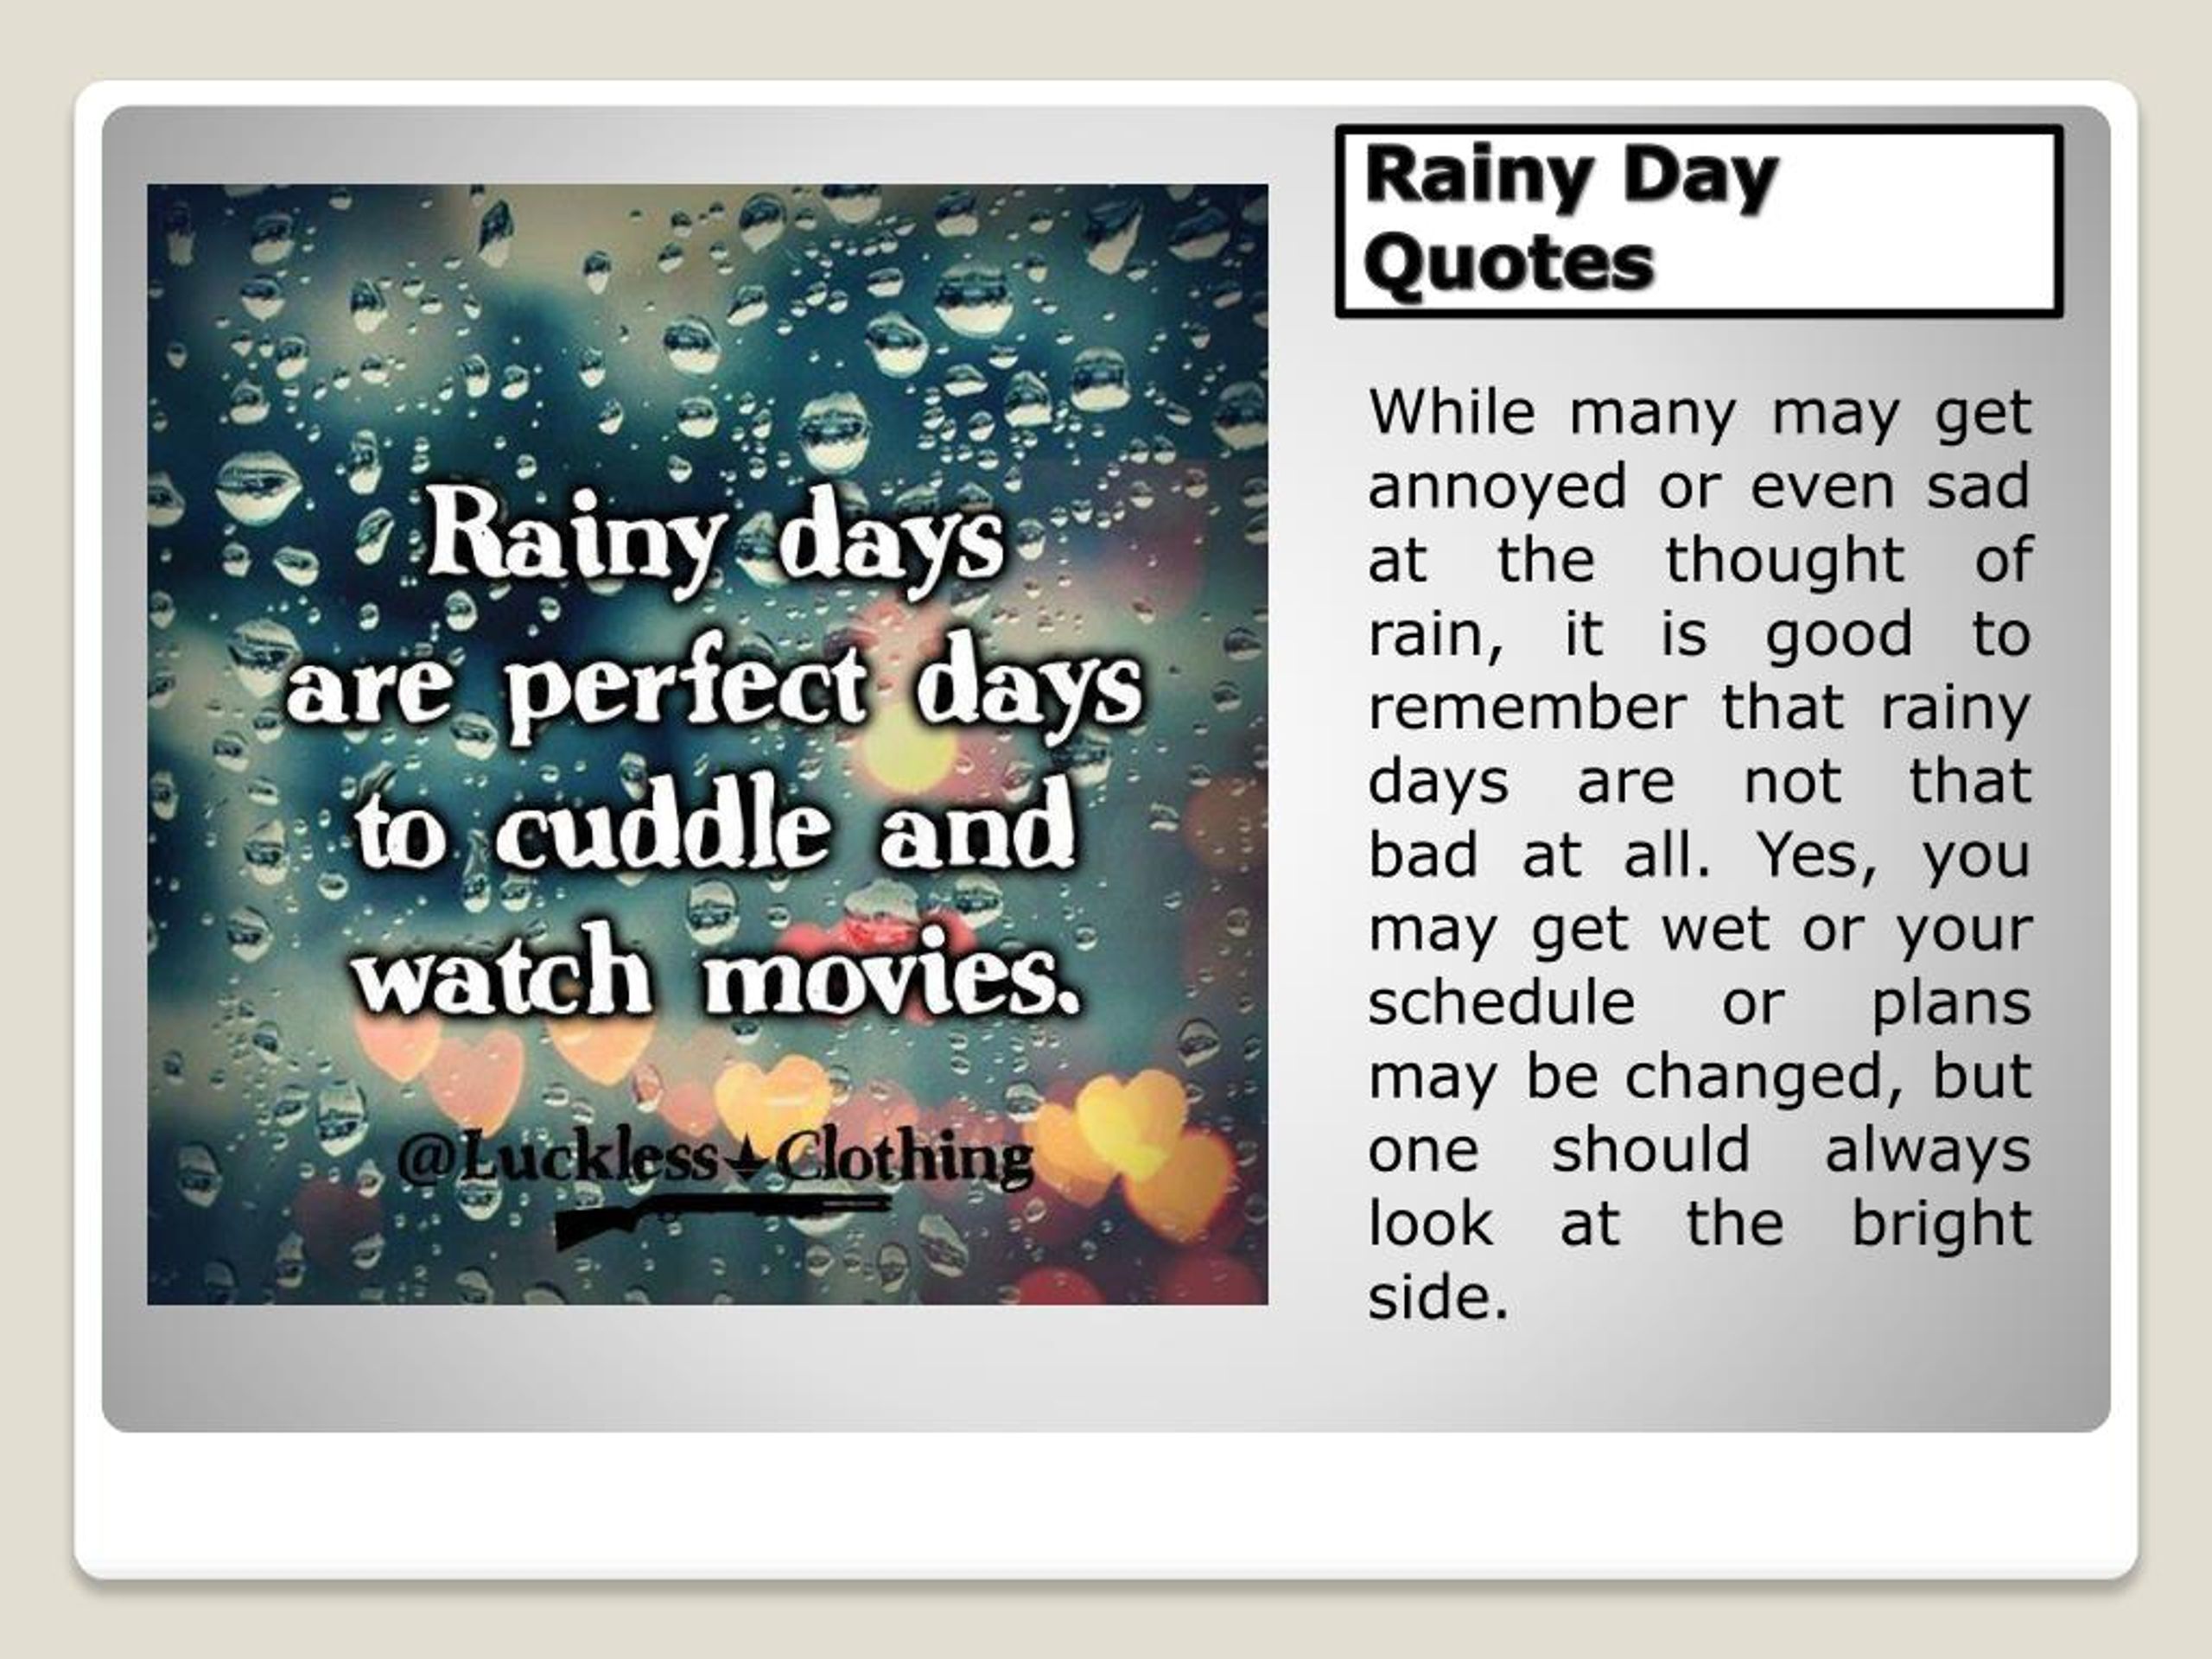 Even Rainy Days Have a Bright Side